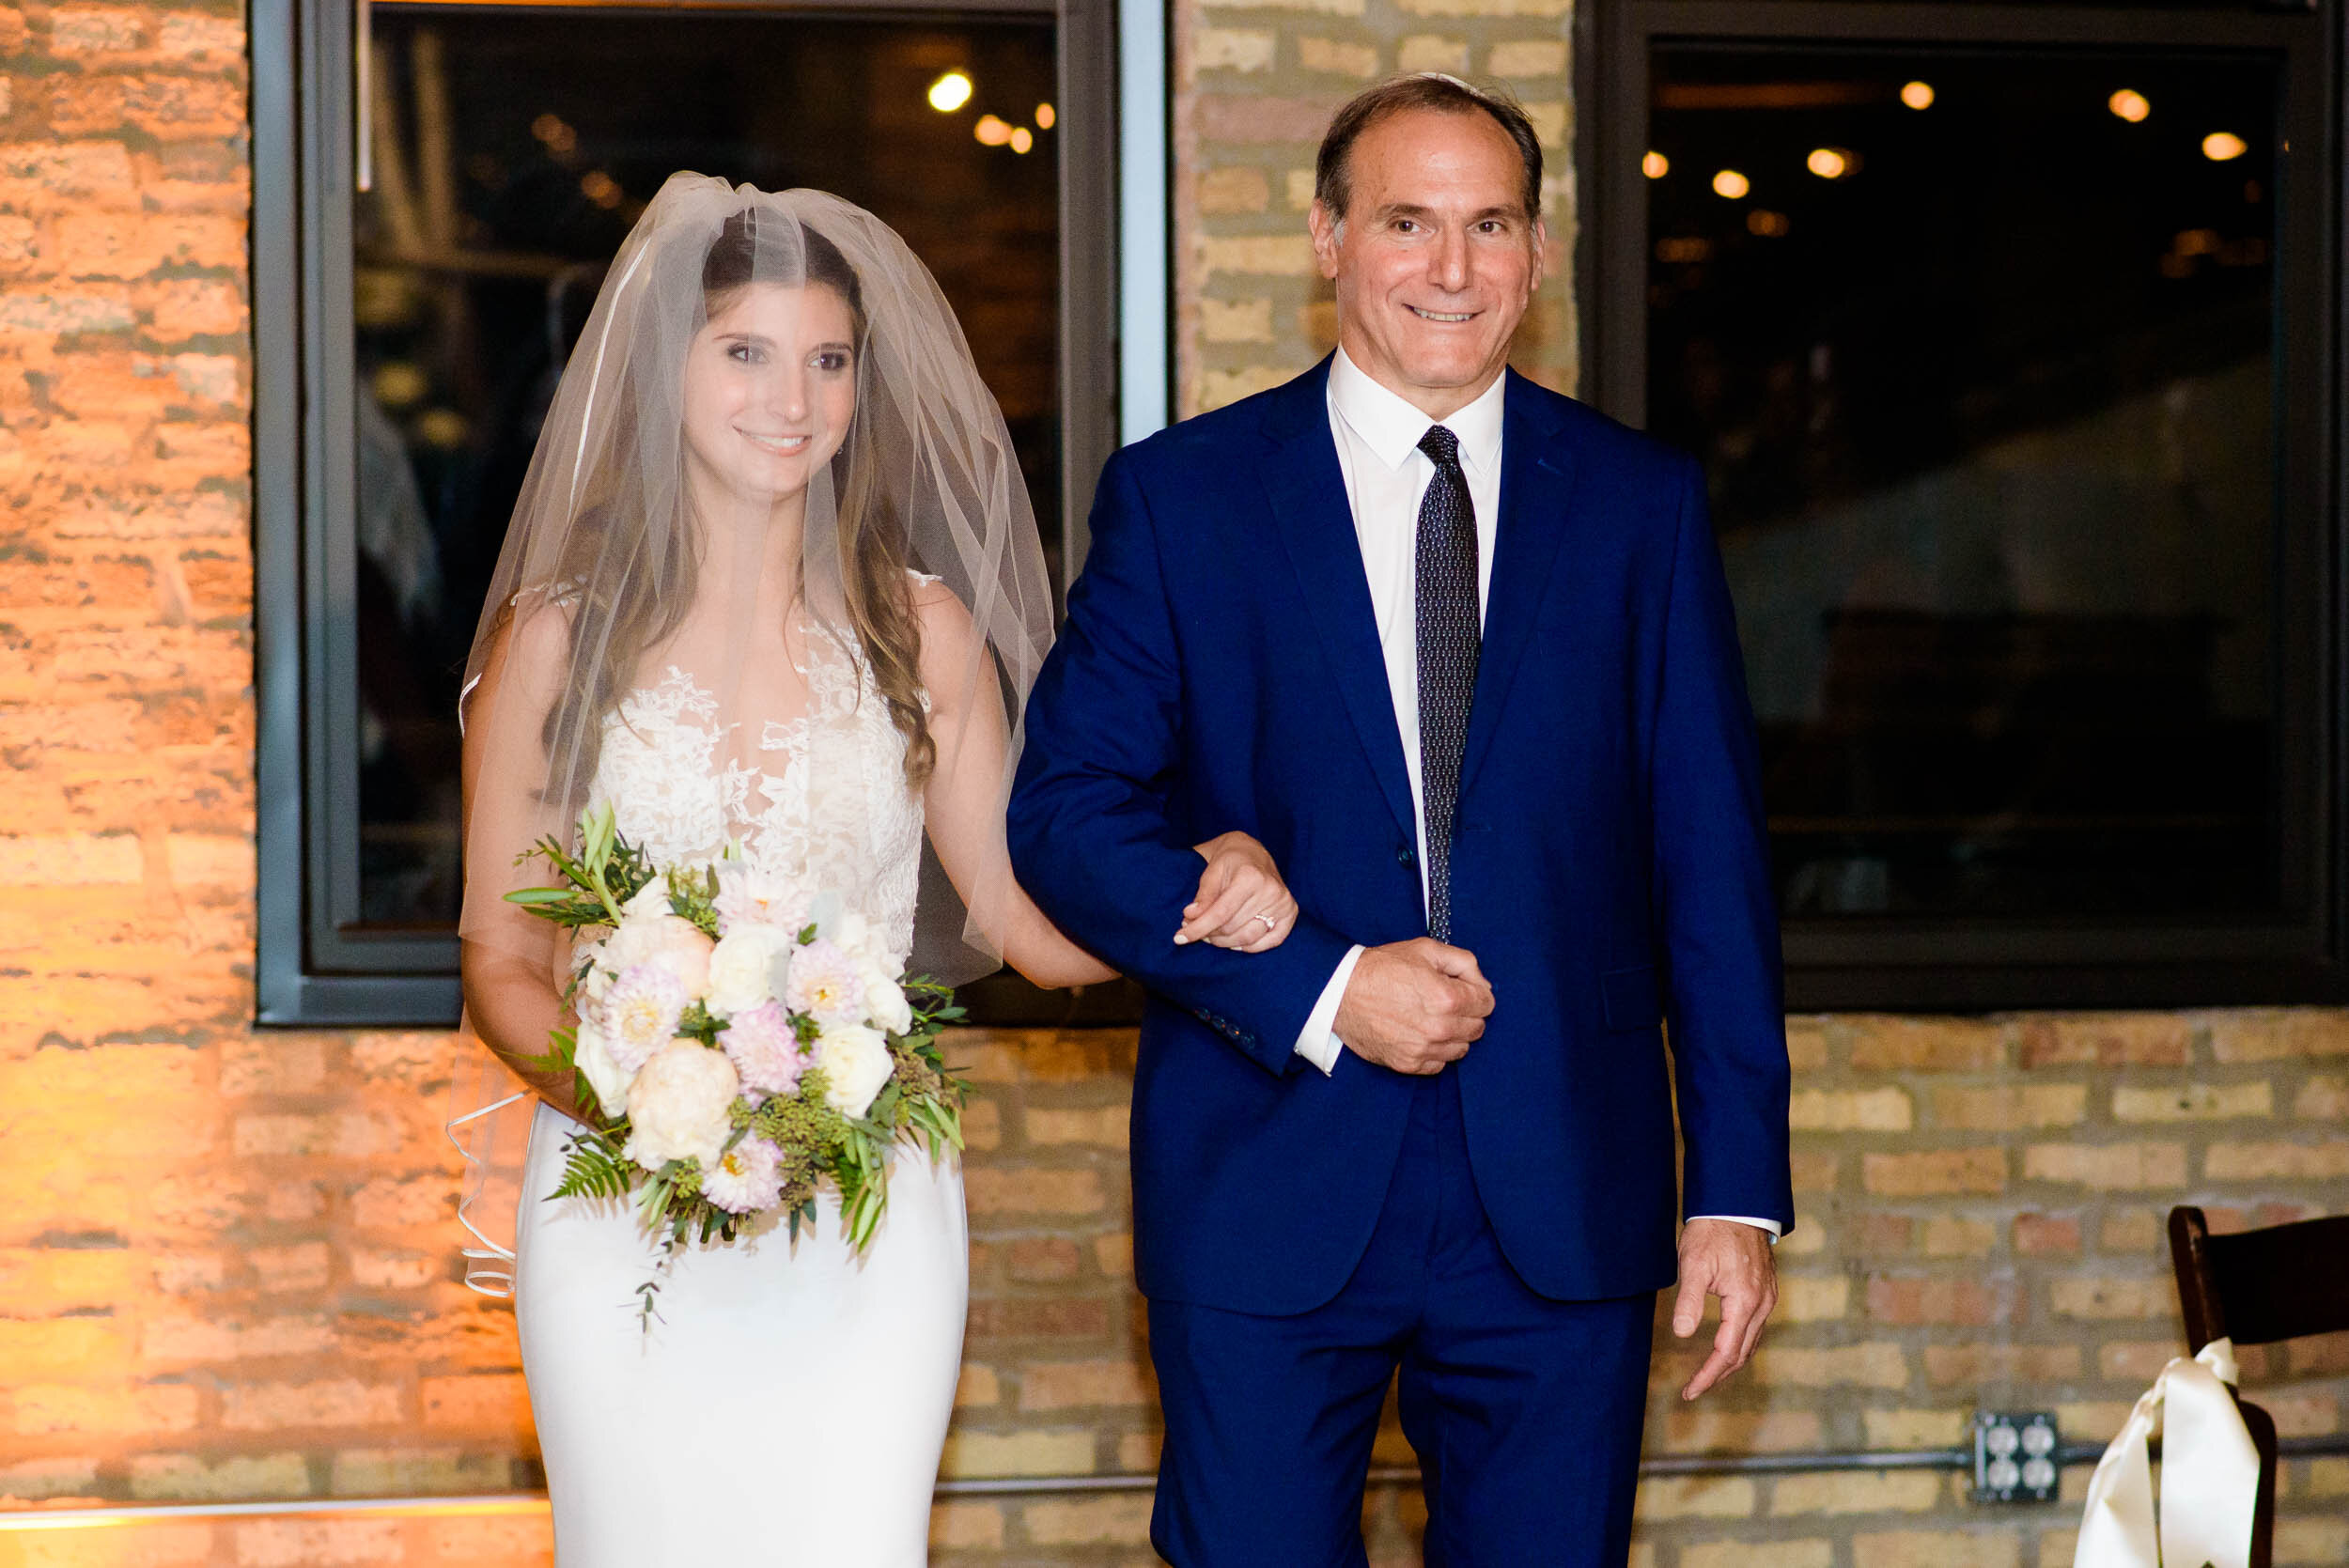 Father walk the bride down the aisle: Ravenswood Event Center Chicago wedding captured by J. Brown Photography.  